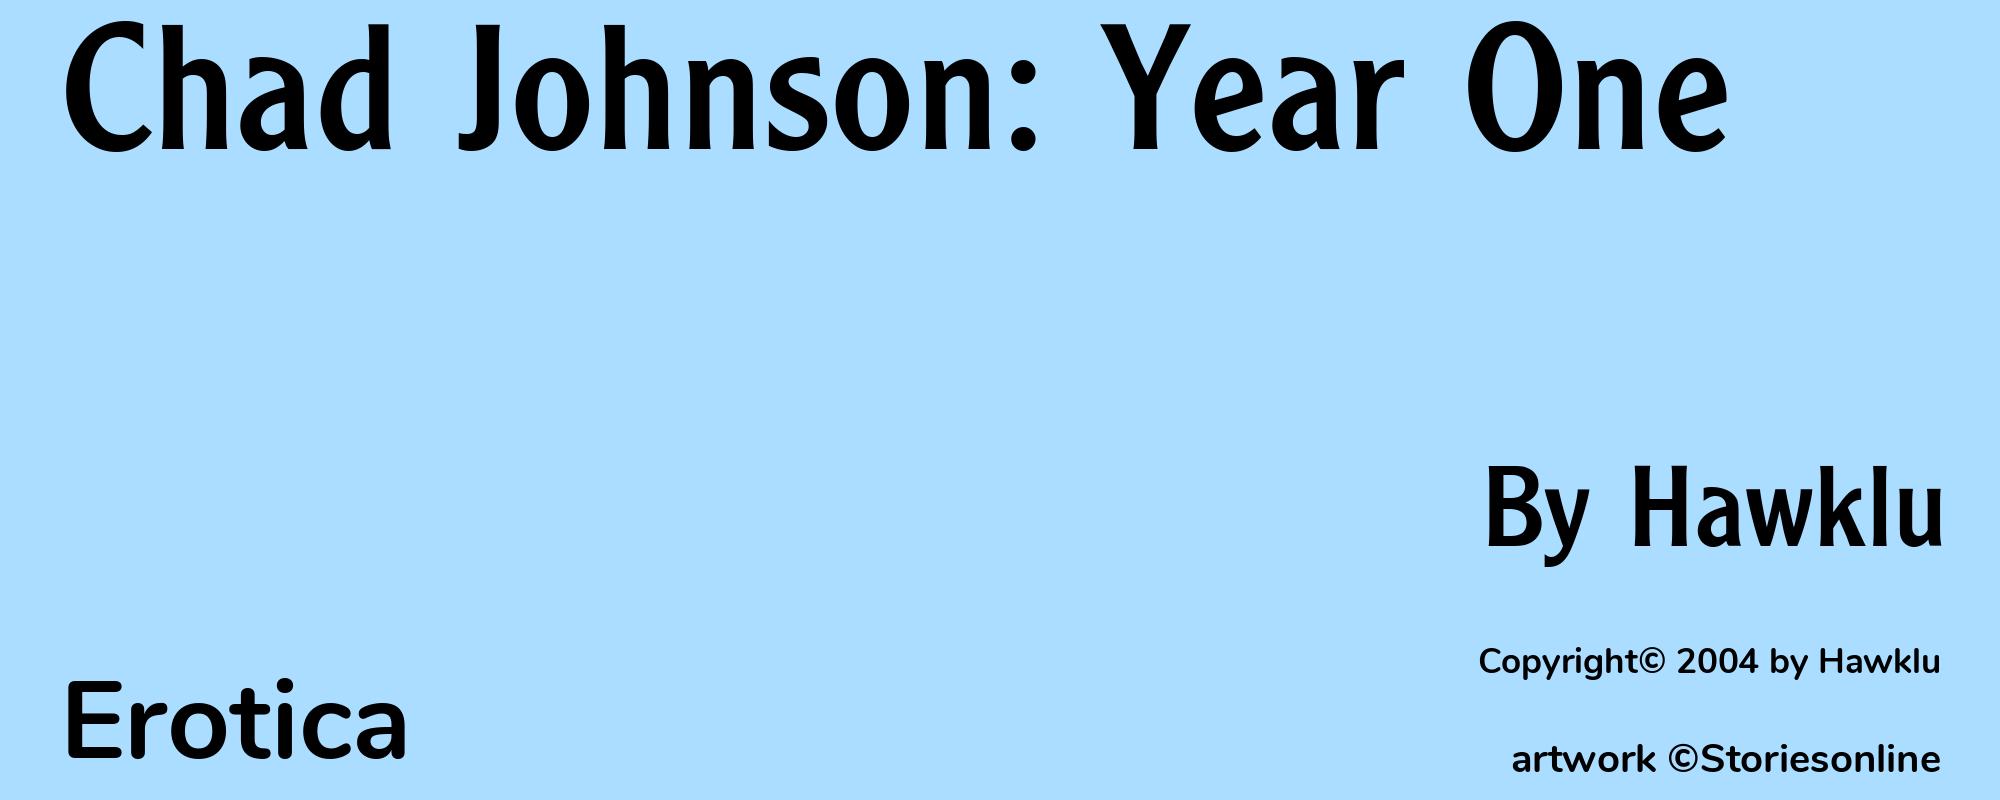 Chad Johnson: Year One - Cover